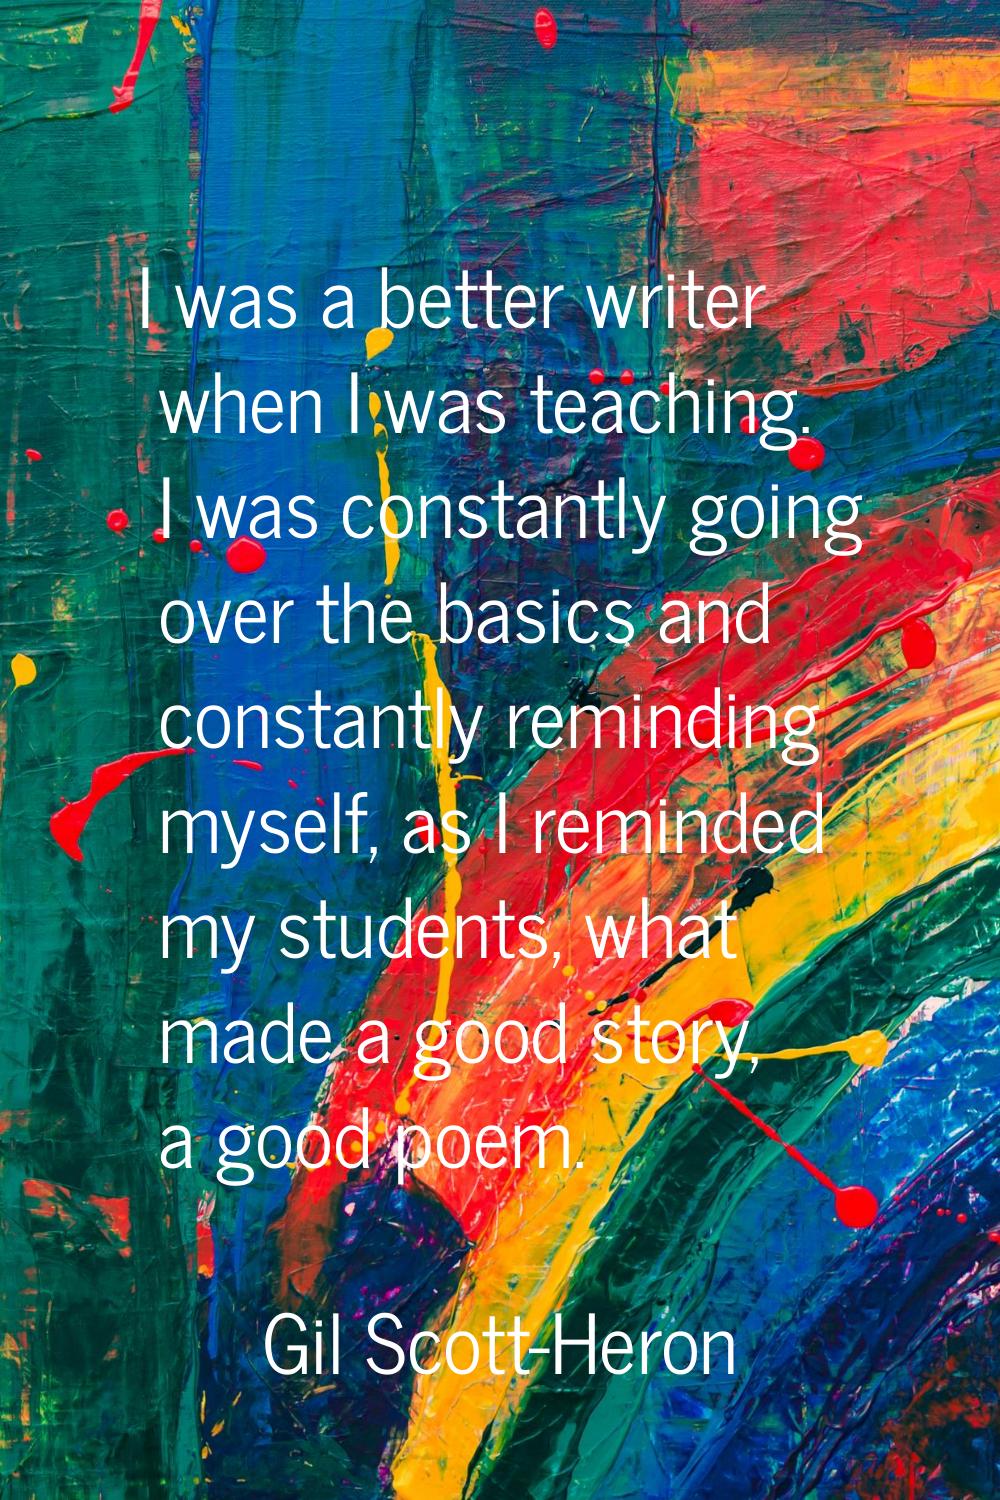 I was a better writer when I was teaching. I was constantly going over the basics and constantly re